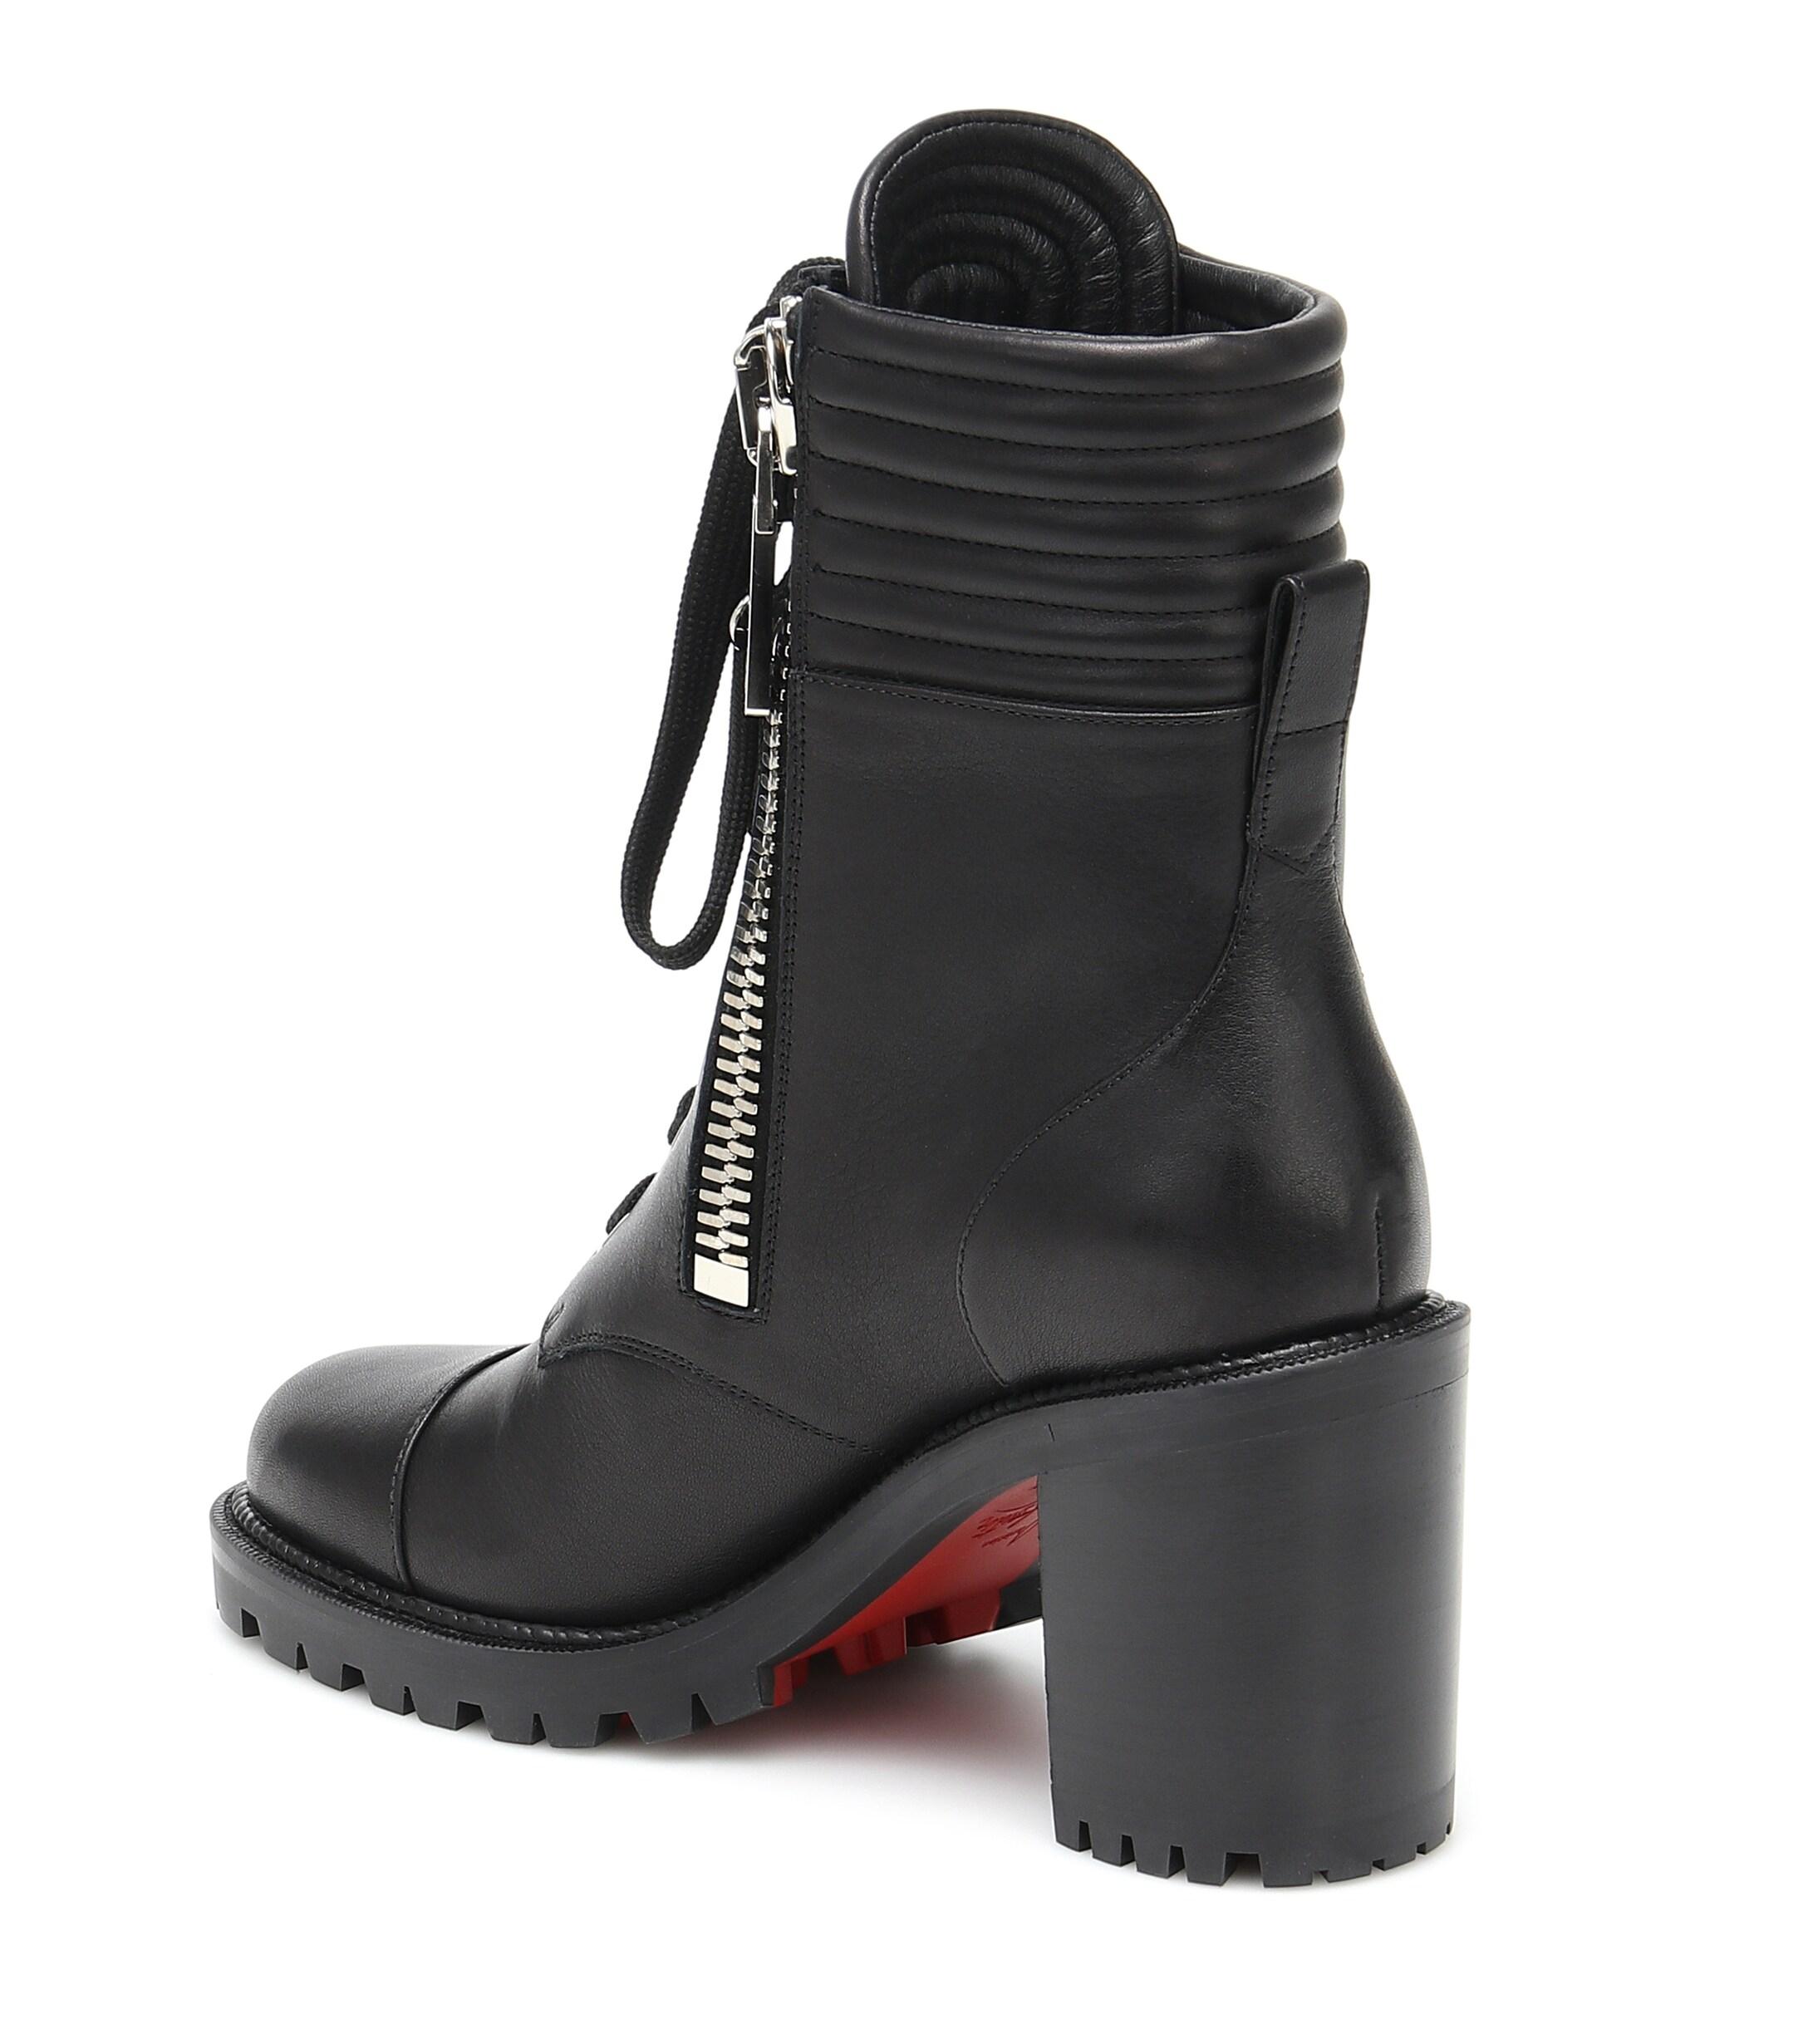 Christian Louboutin En Hiver 70 Leather Ankle Boots in Black | Lyst